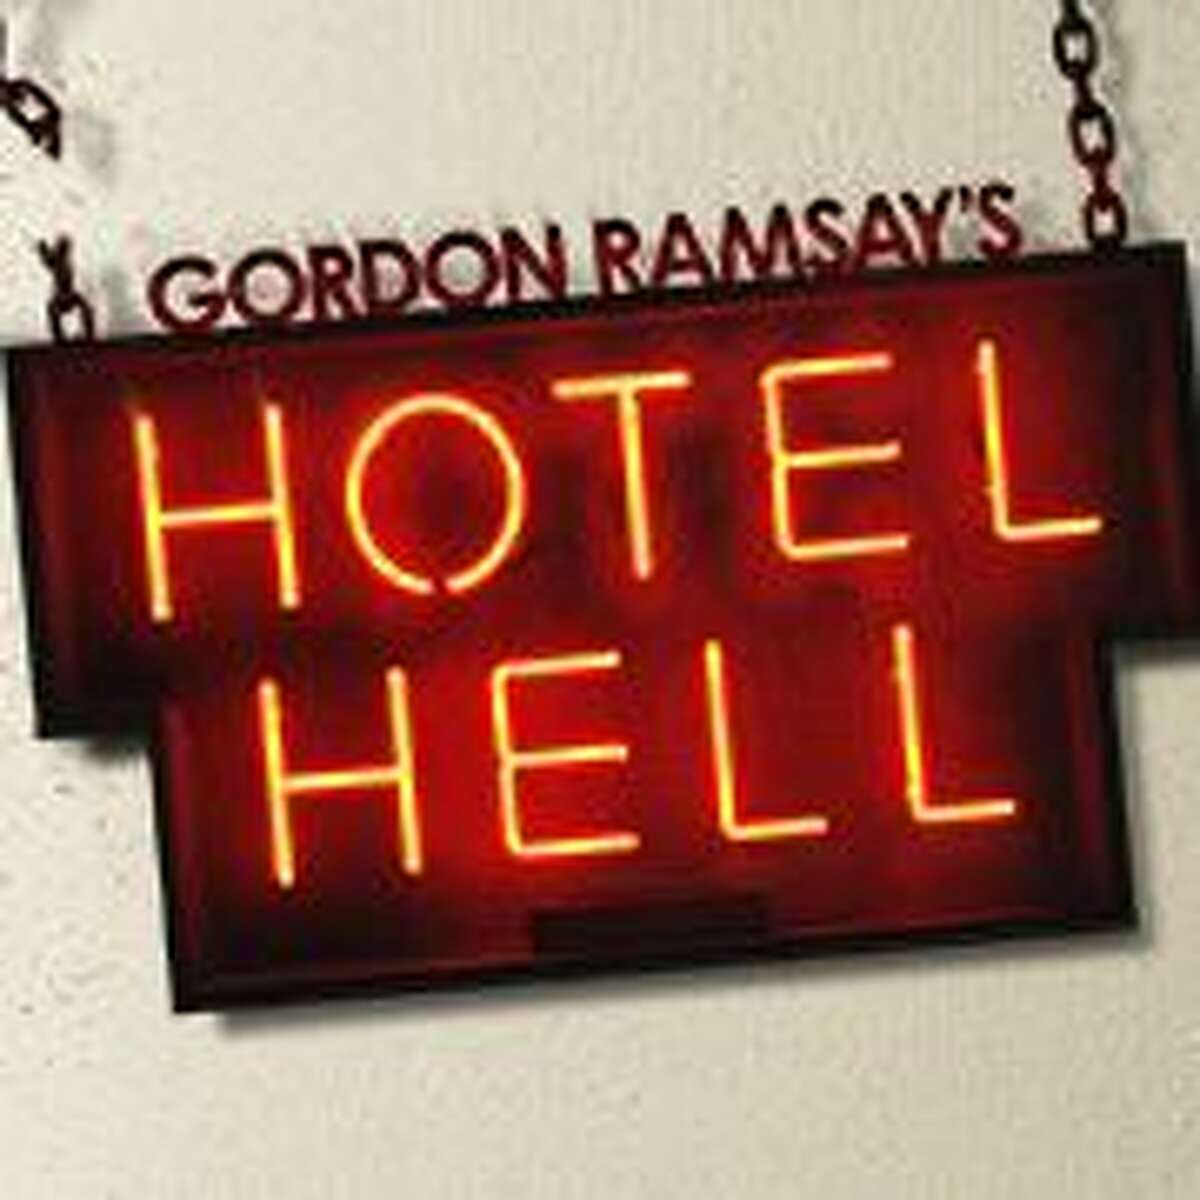 A logo from the "Hotel Hell" Facebook page.